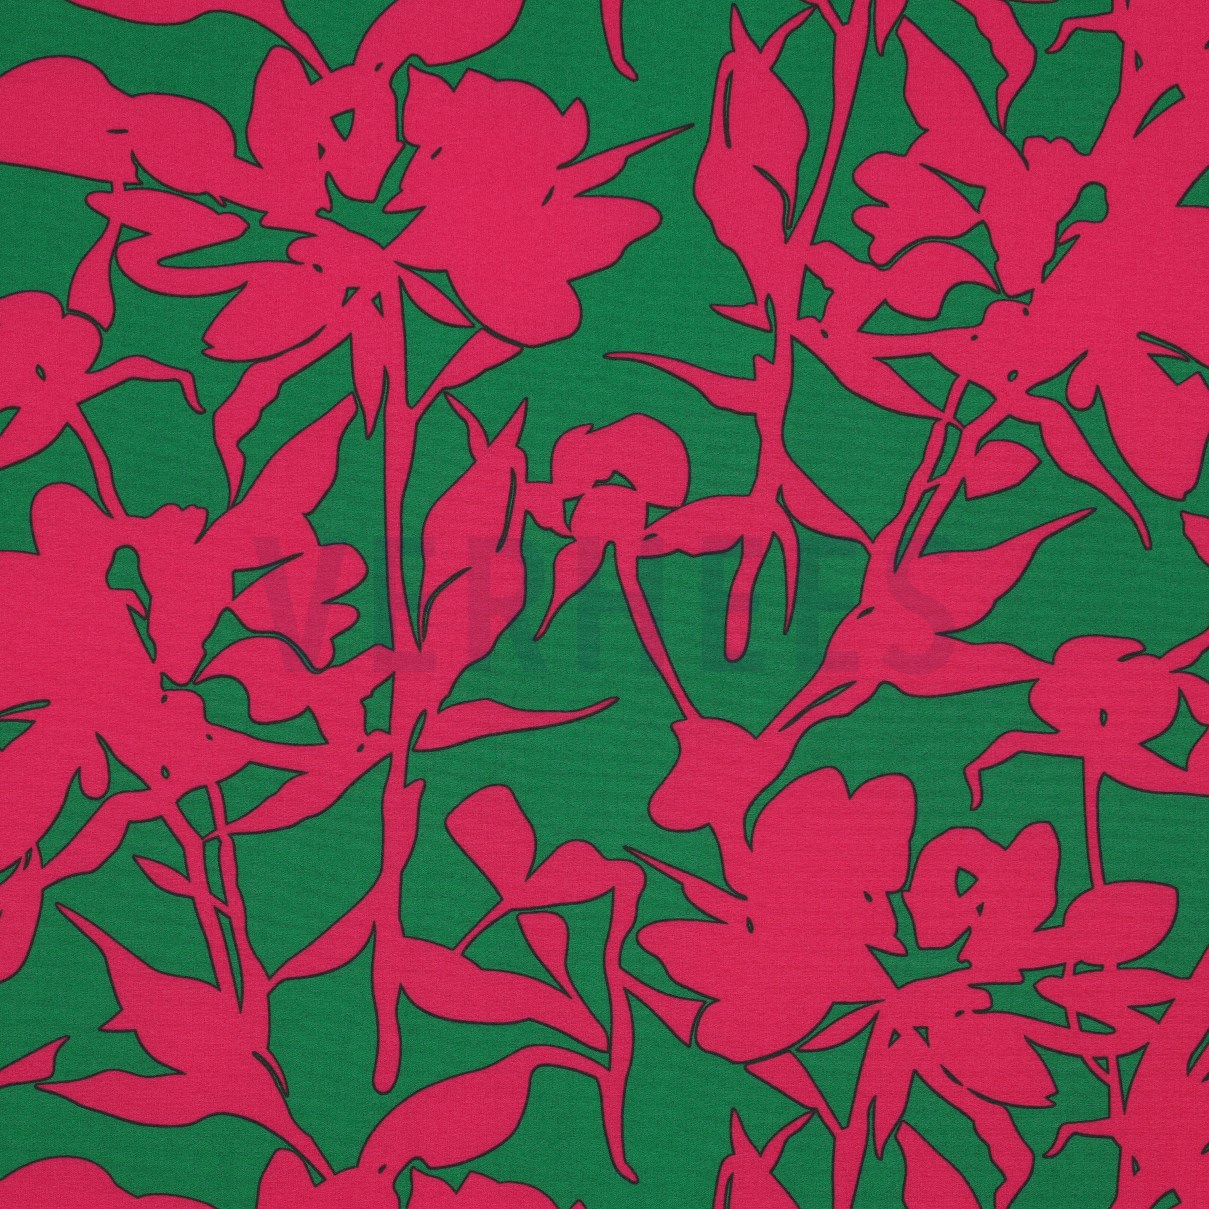 MAGNOLIA STRETCH GRAPHIC GREEN / PINK (high resolution)